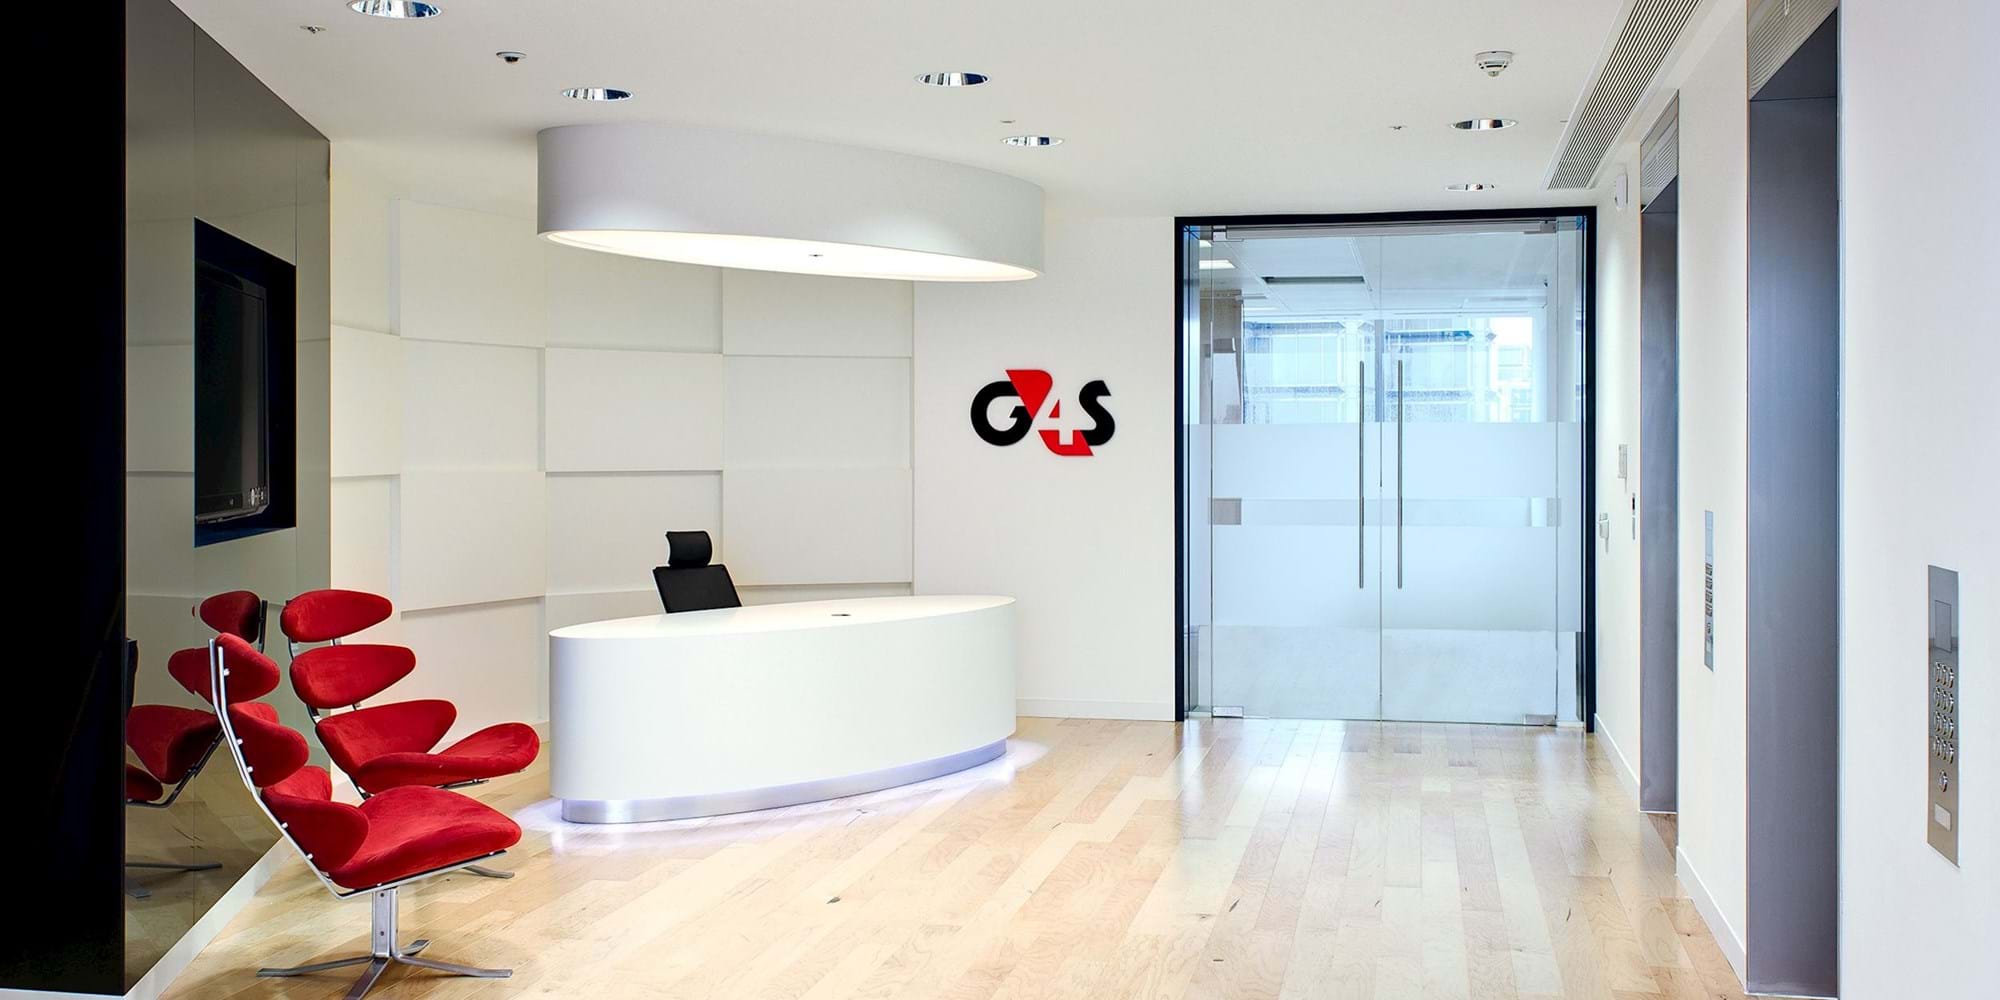 Modus Workspace office design, fit out and refurbishment - G4S - Reception - GS4_01_highres_jpg_sRGB.jpg